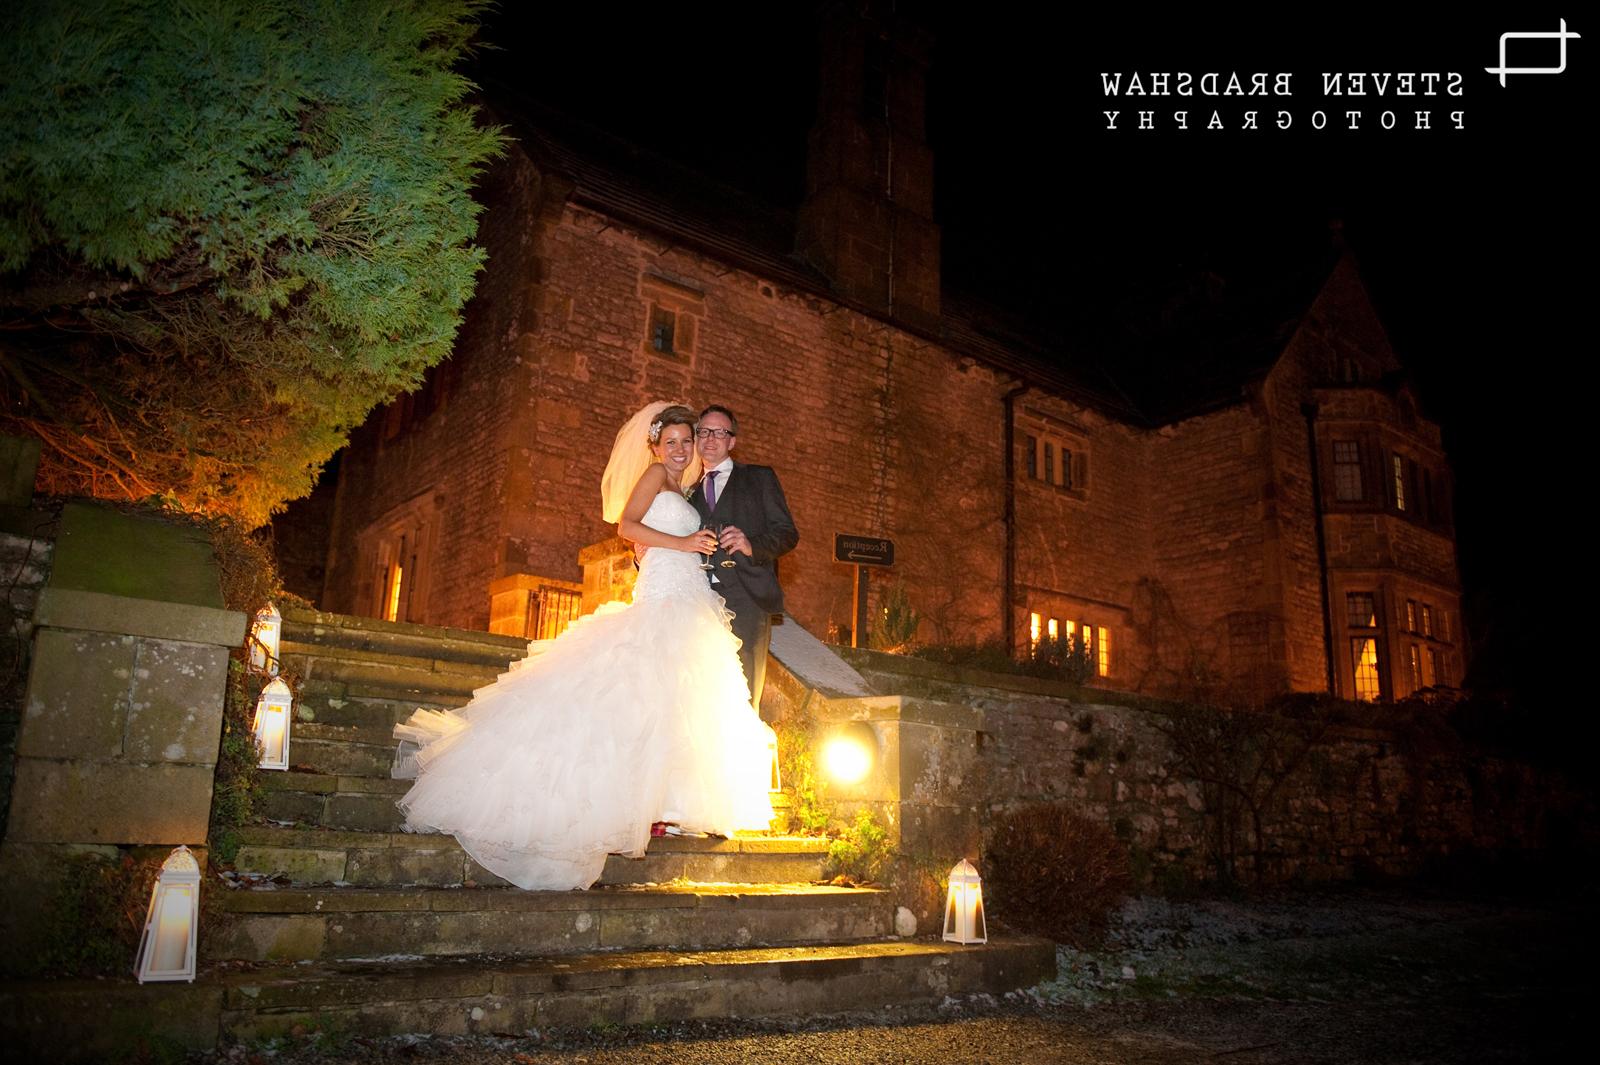 Hartington Hall is a lovely setting for a large and relaxed wedding weekend,